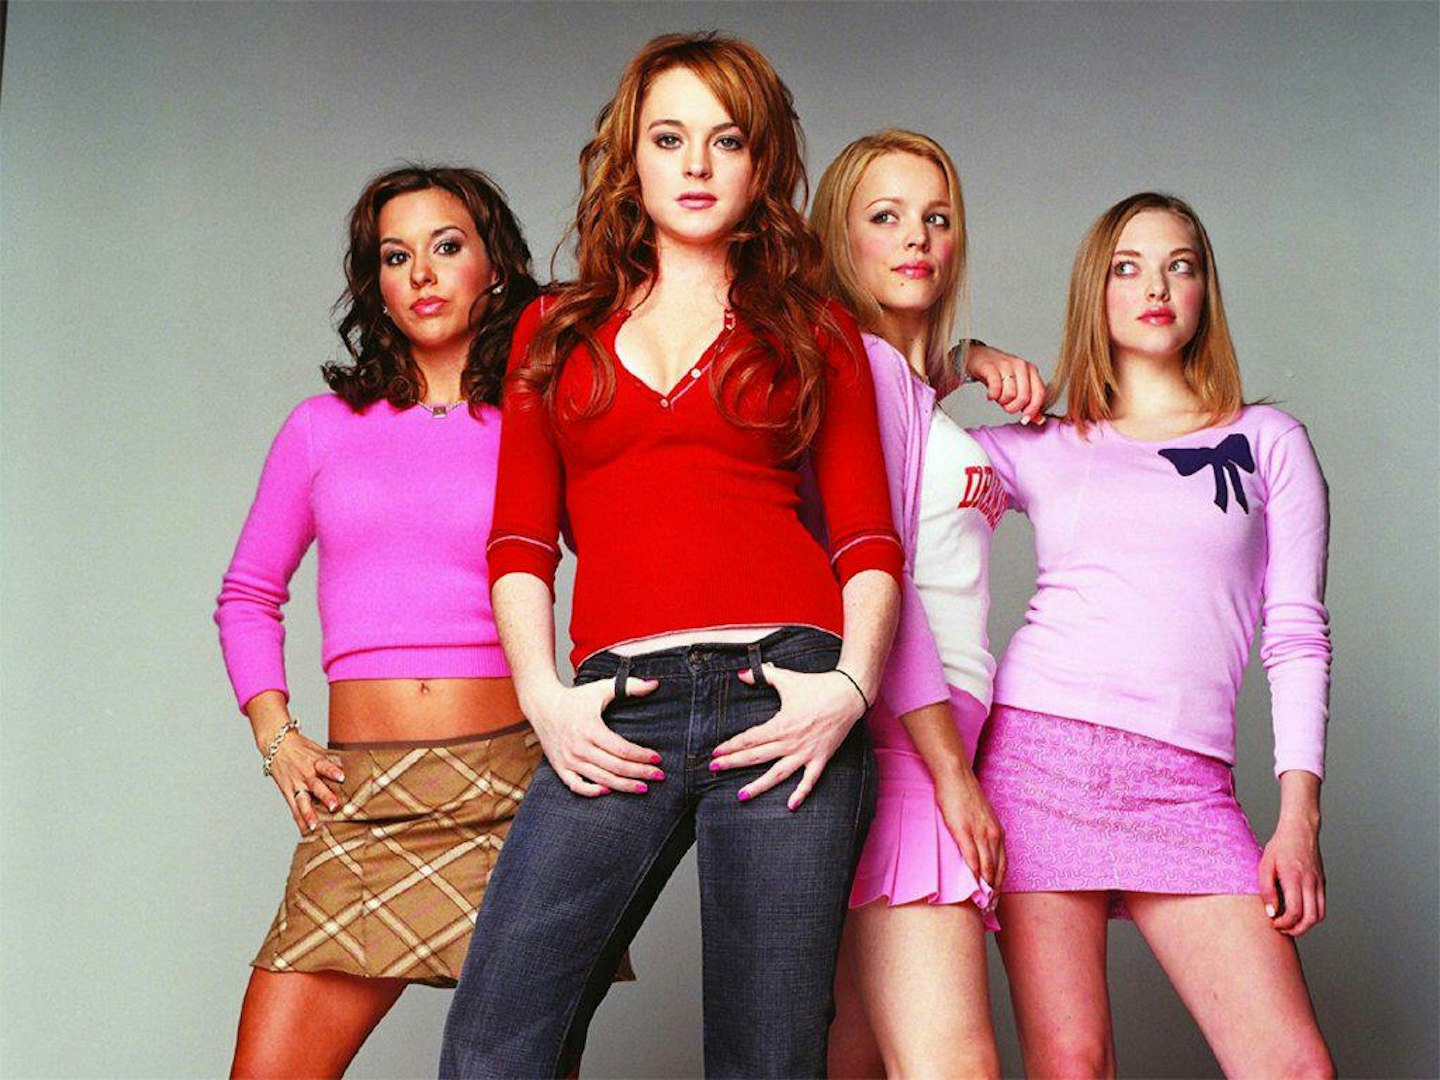 Mean Girls' characters: Where are they now?